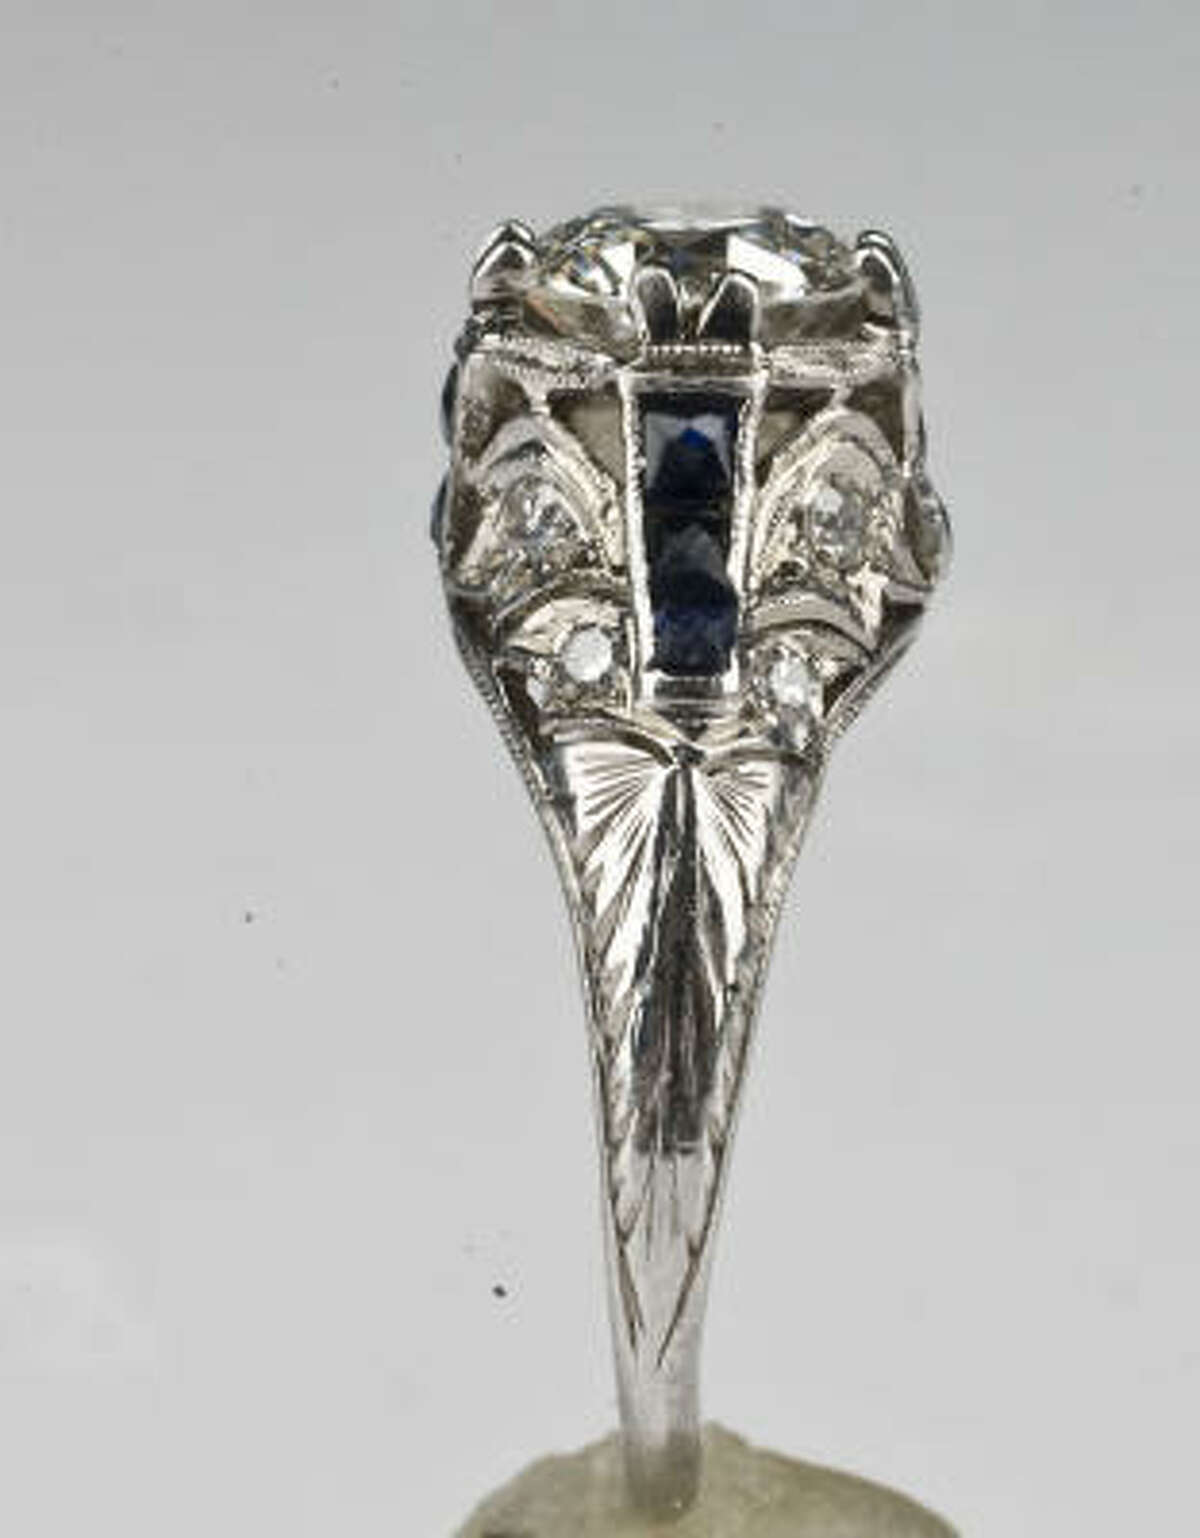 Love the detailing on the band of this platinum Art Deco diamond ring with sapphires, $12,500, Past Era Fine Antique & Estate Jewelry